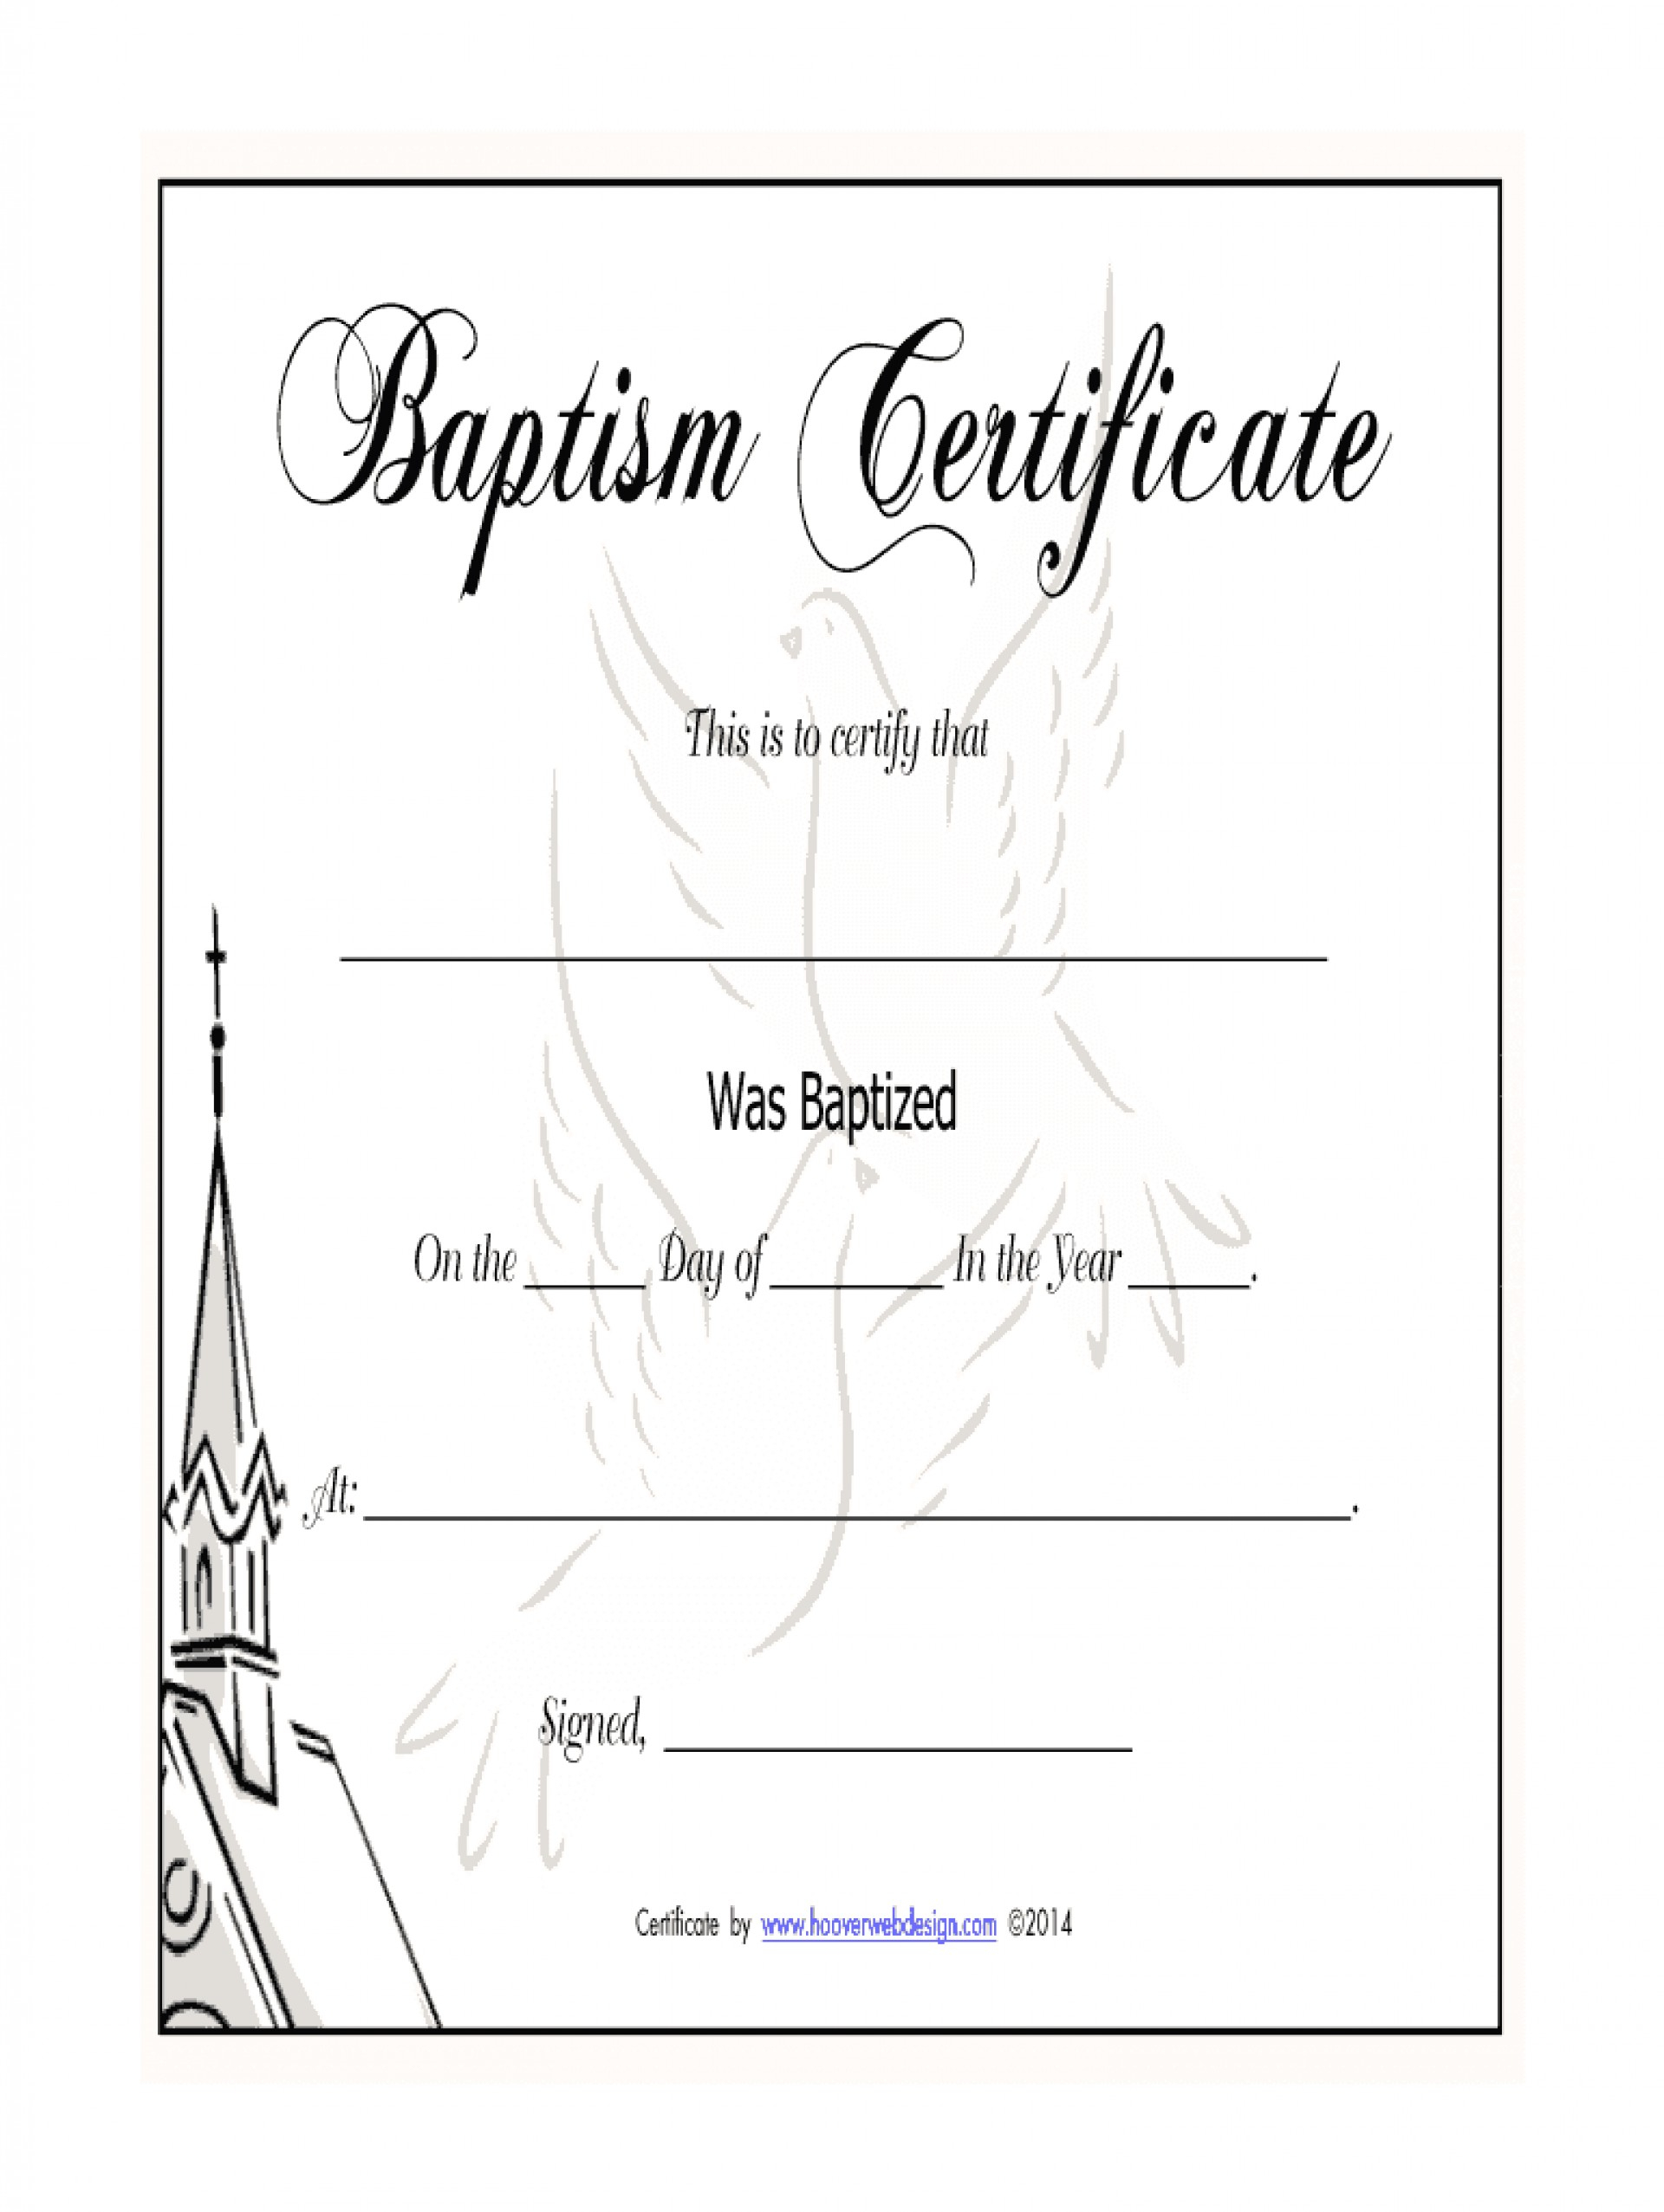 F995 Certificate Of Baptism Template | Wiring Resources In Baptism Certificate Template Word